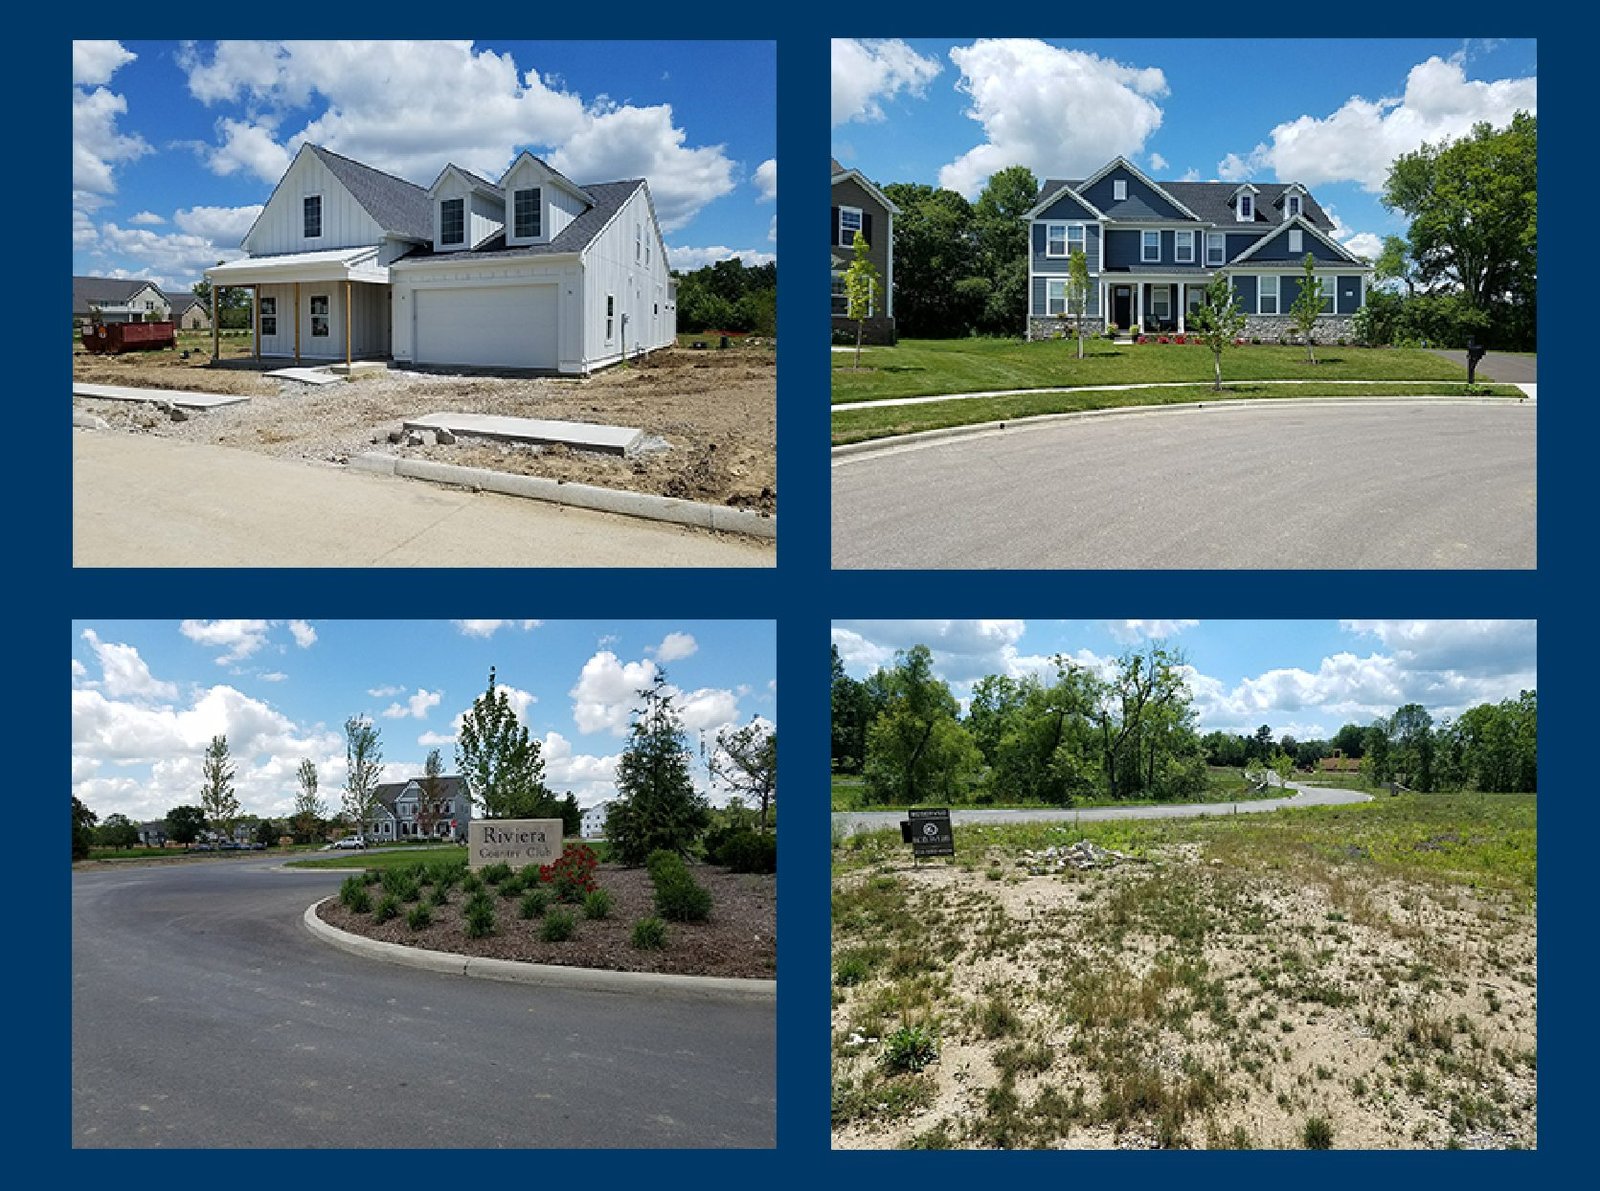 Five New Dublin Subdivisions You Need to Know About